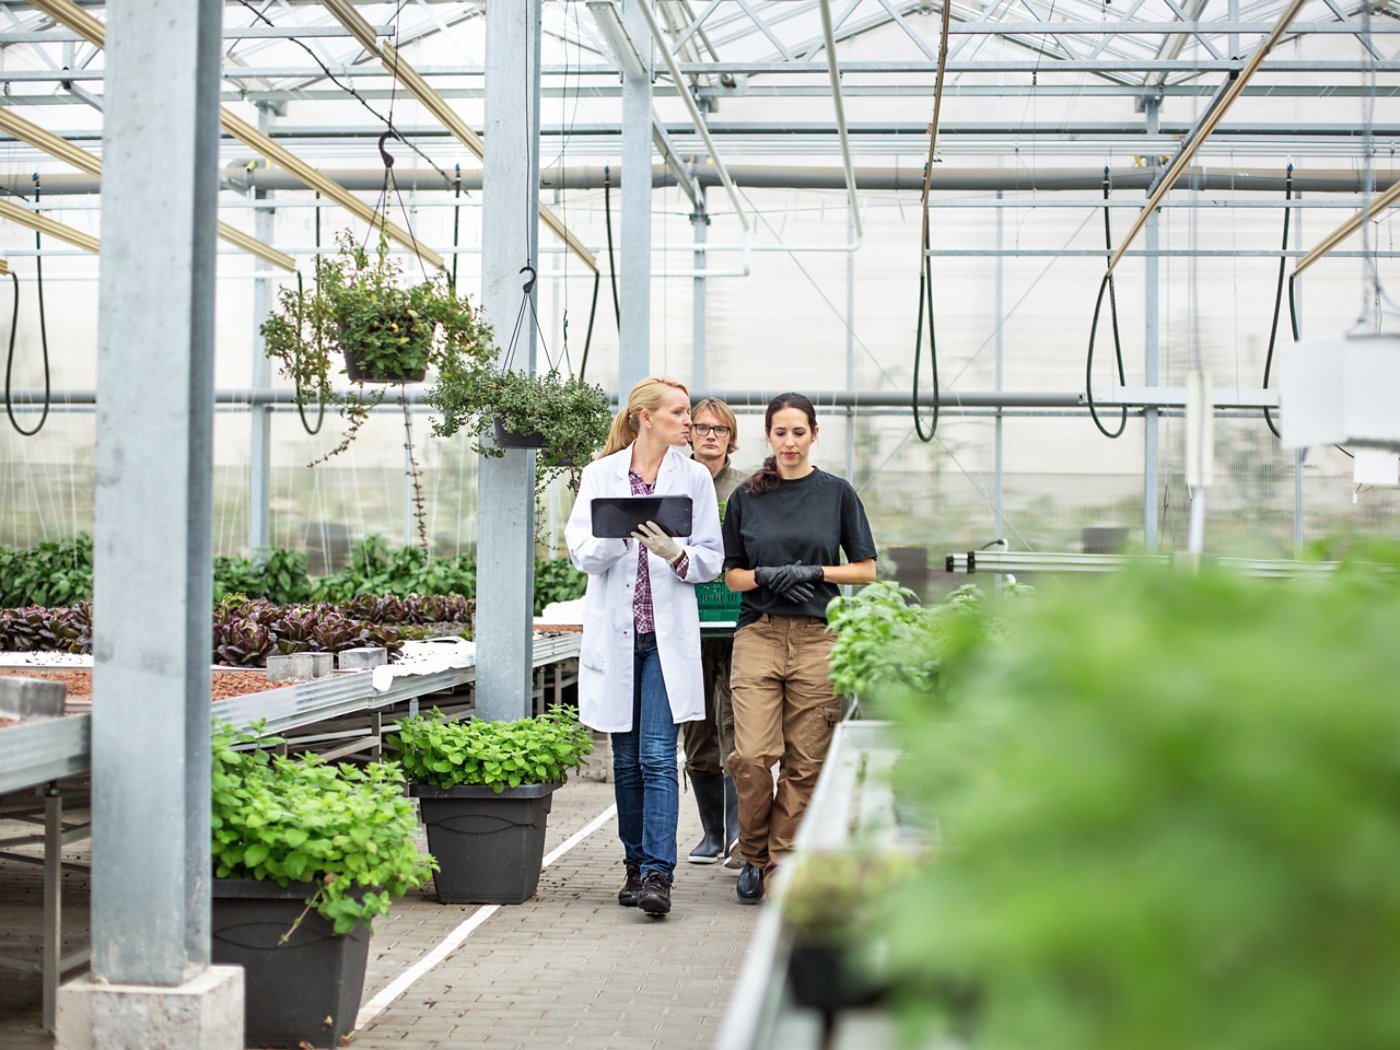 Female scientist with garden workers in greenhouse